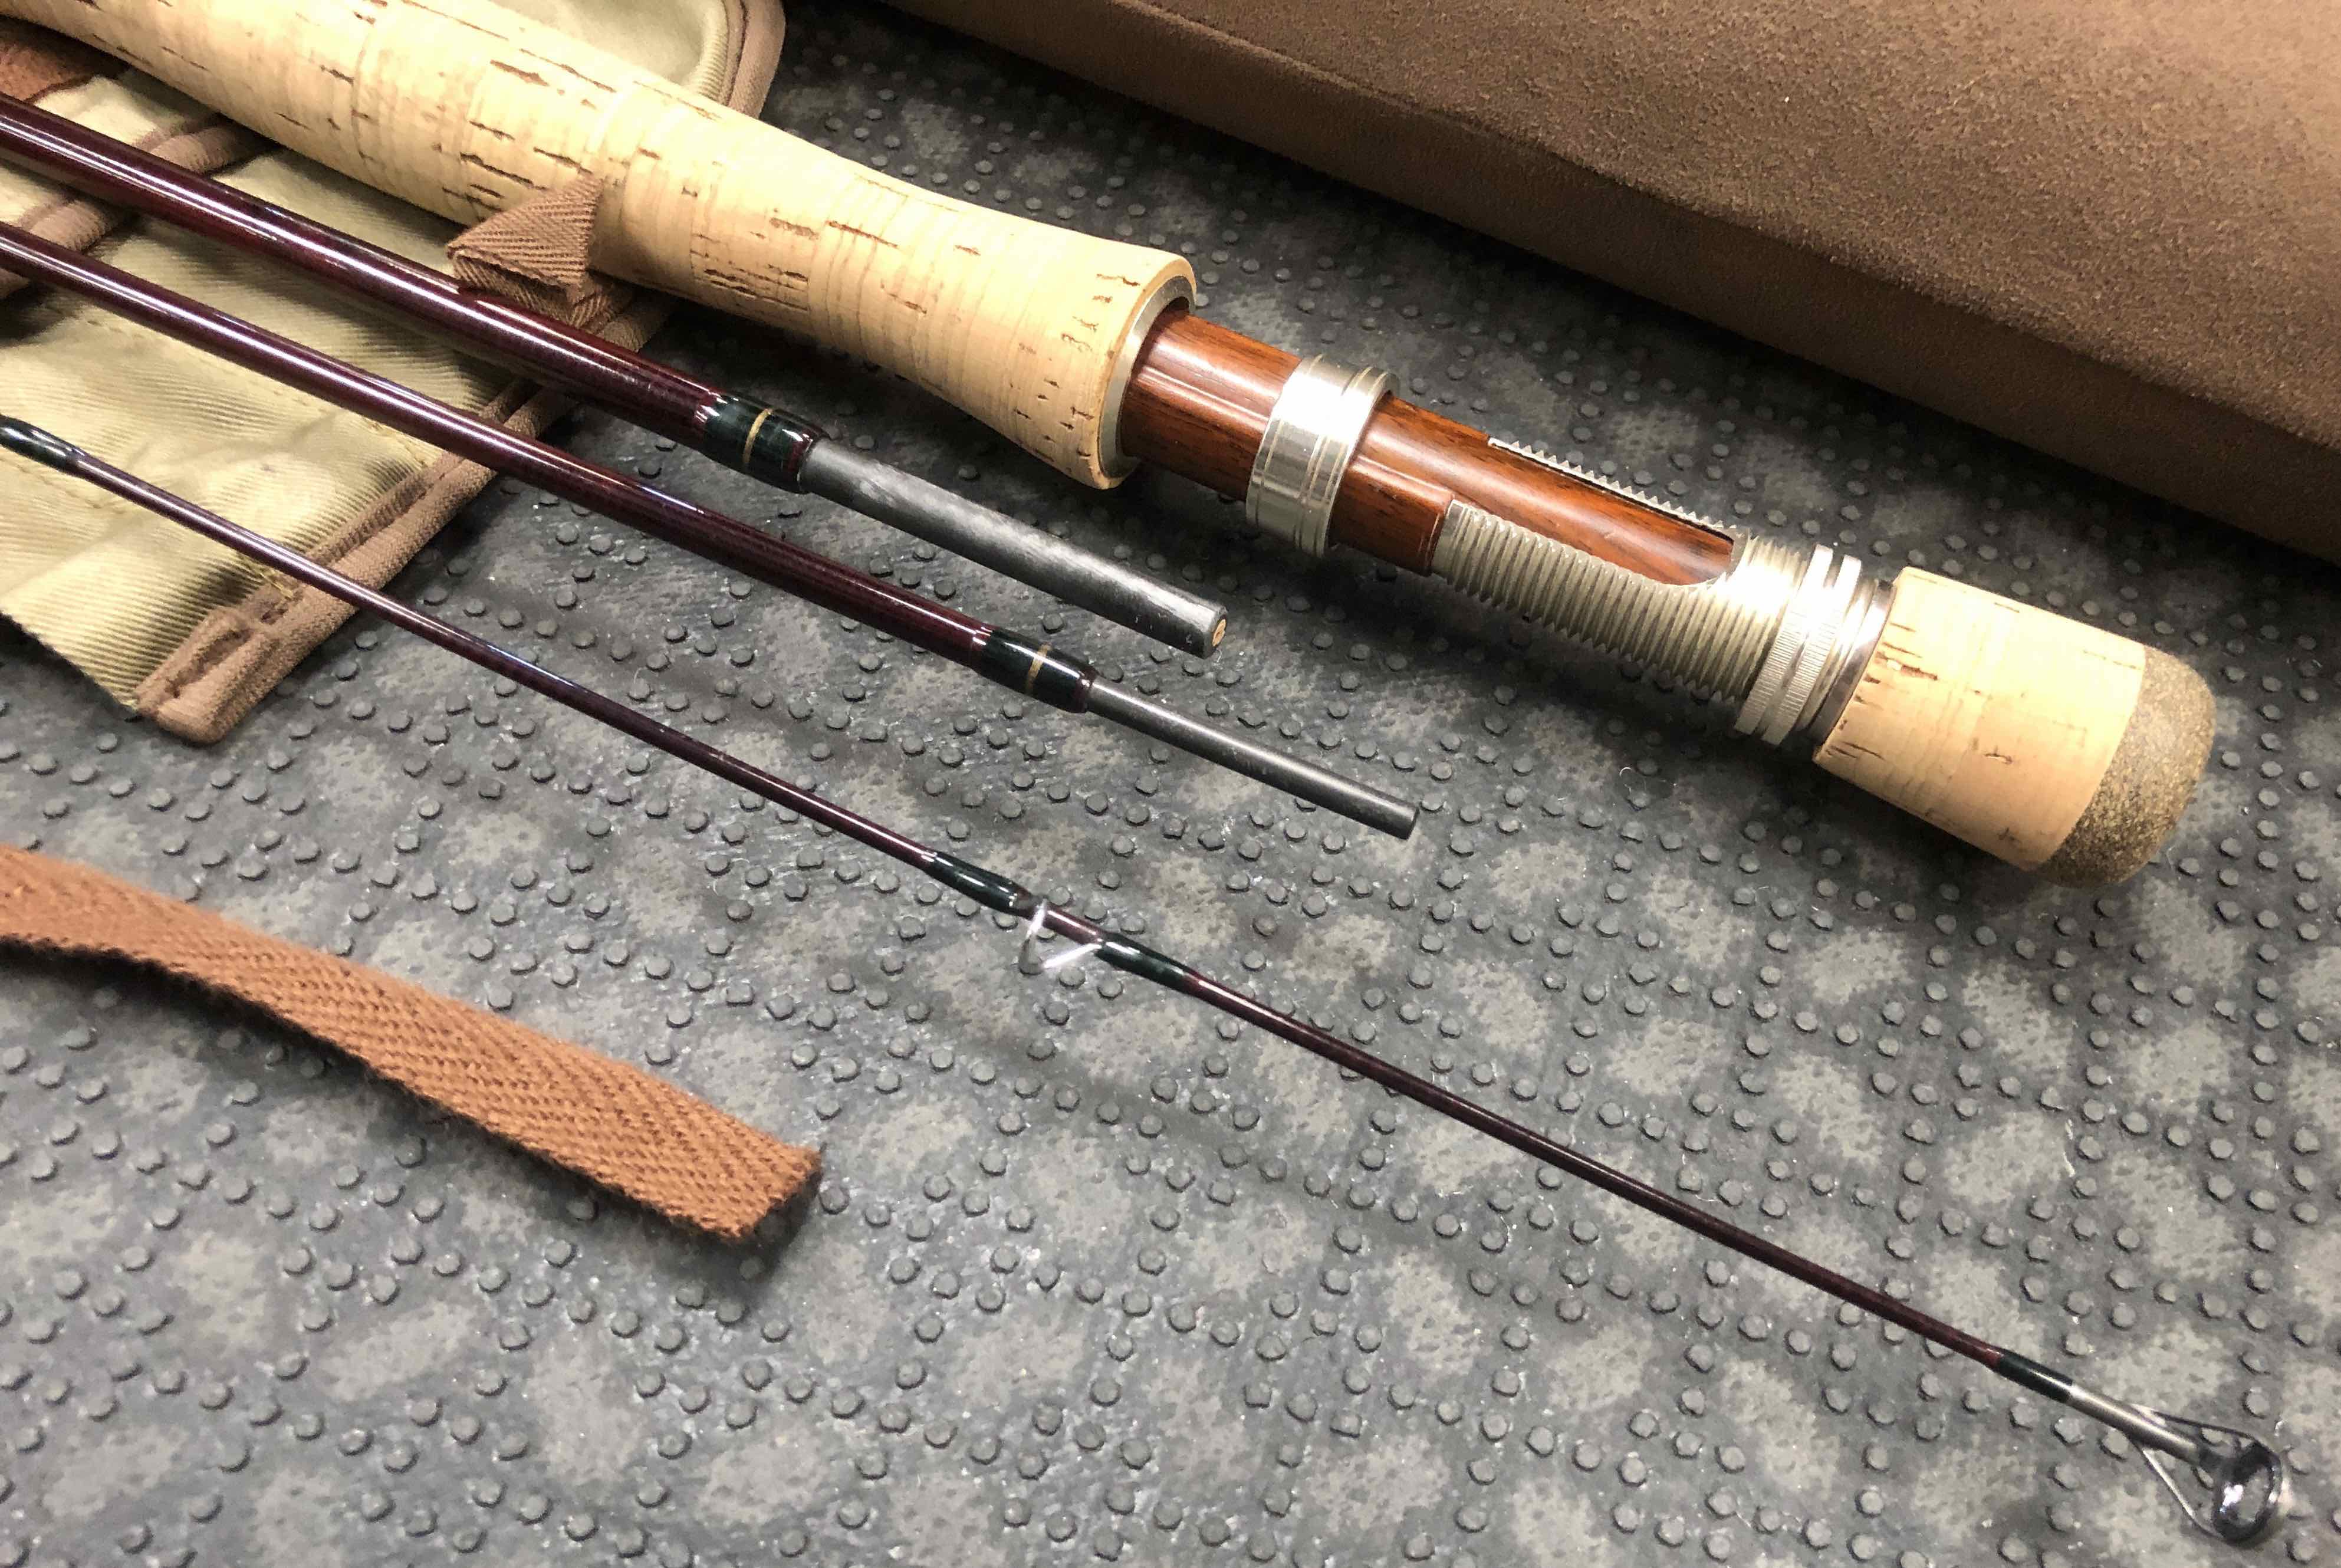 Daiwa Alltmor Rendezvous - AME10084 - 10’ 7-9Wt Fly Rod - LIKE NEW! - $120